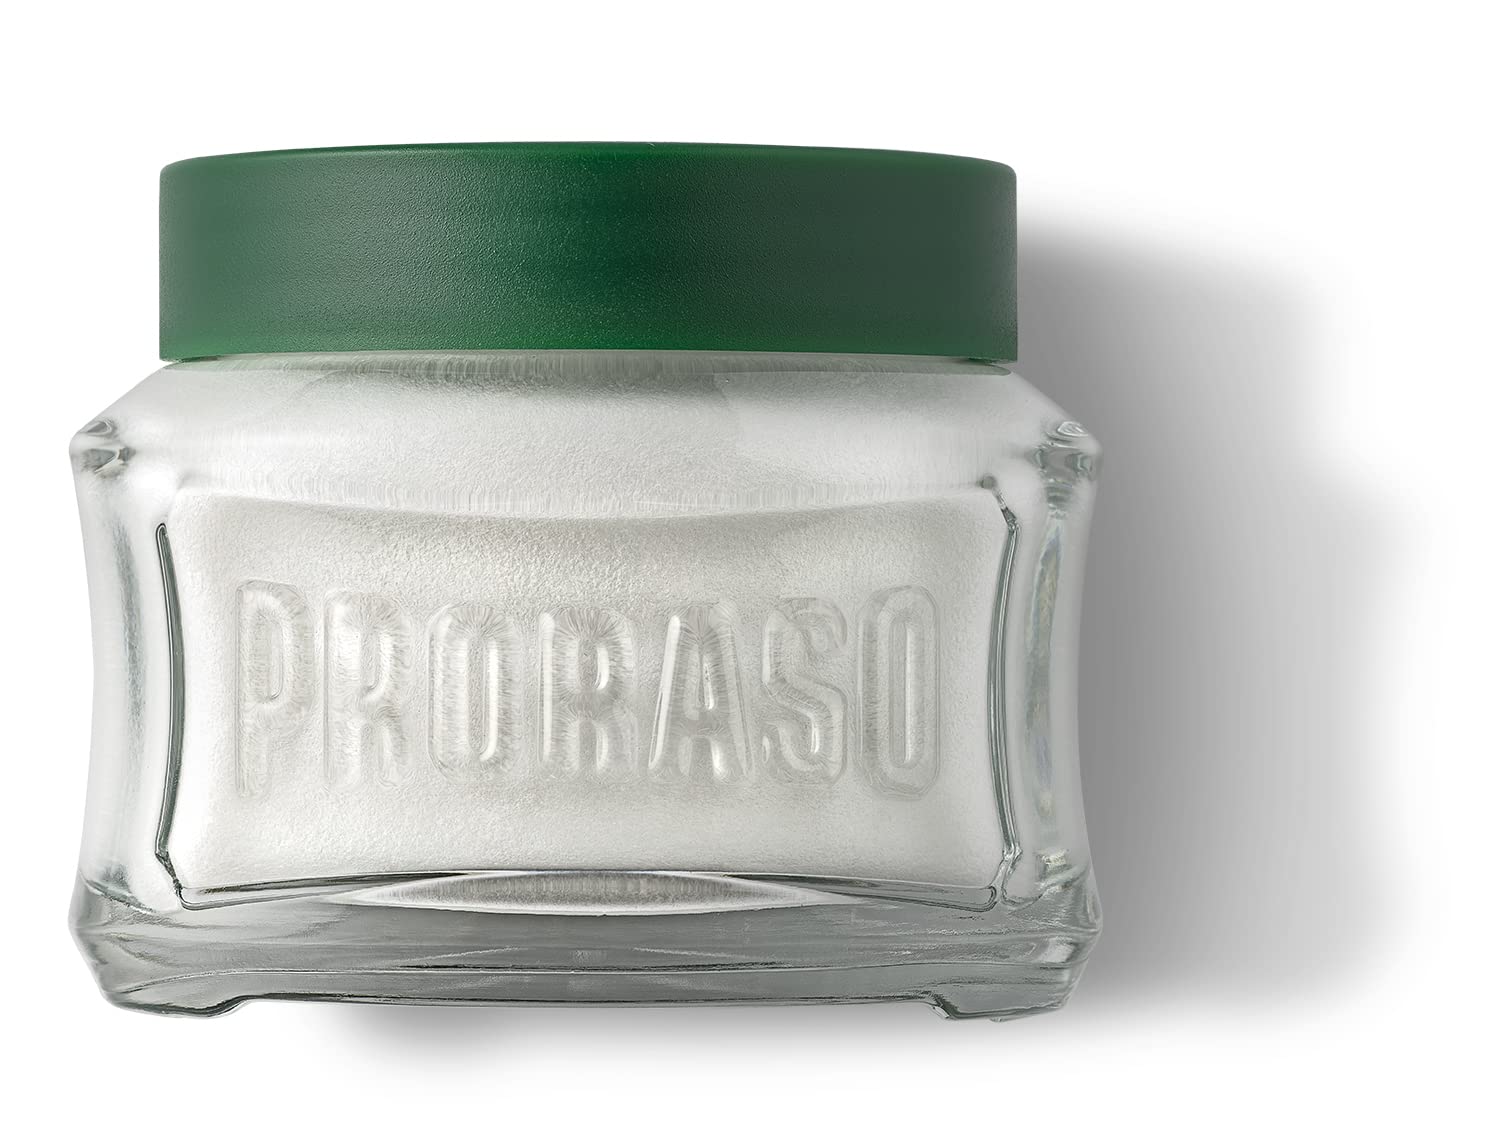 Proraso Pre-Shave Conditioning Cream for Men, Refreshing and Toning with Menthol and Eucalyptus Oil, 3.6 oz